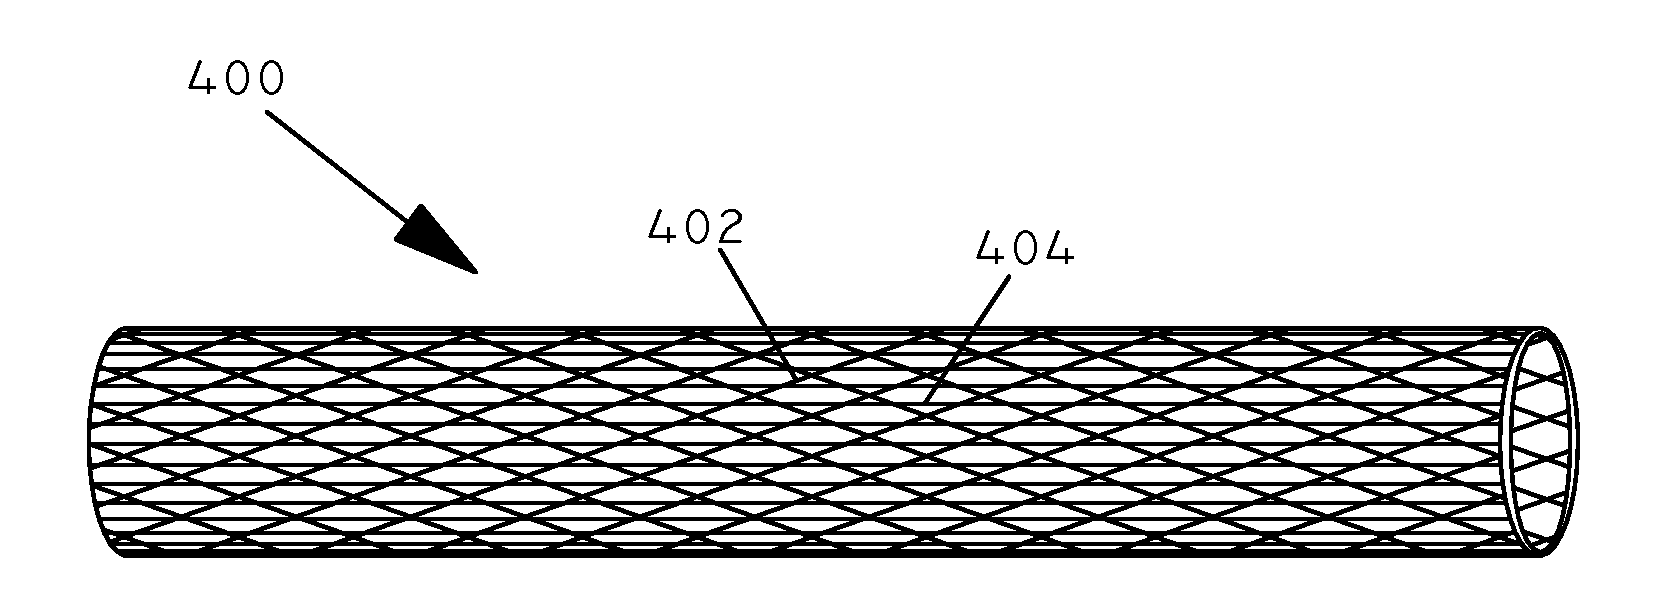 Multi-layered coatings and methods for controlling elution of active agents